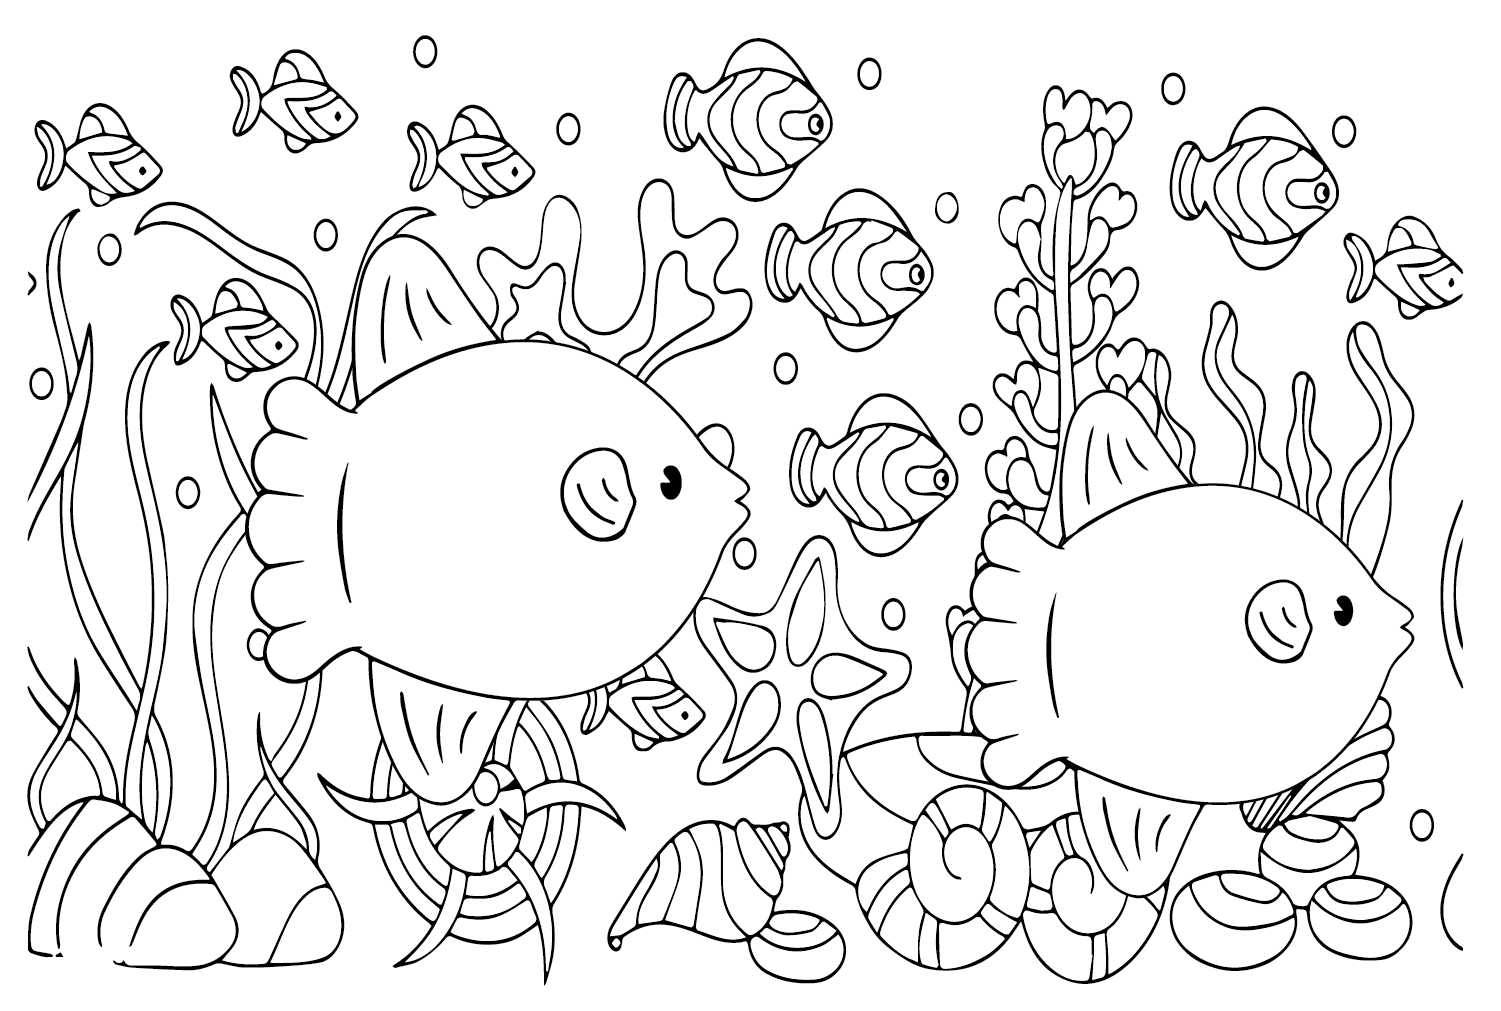 Pictures of Ocean Sunfish Coloring Page - Free Printable Coloring Pages